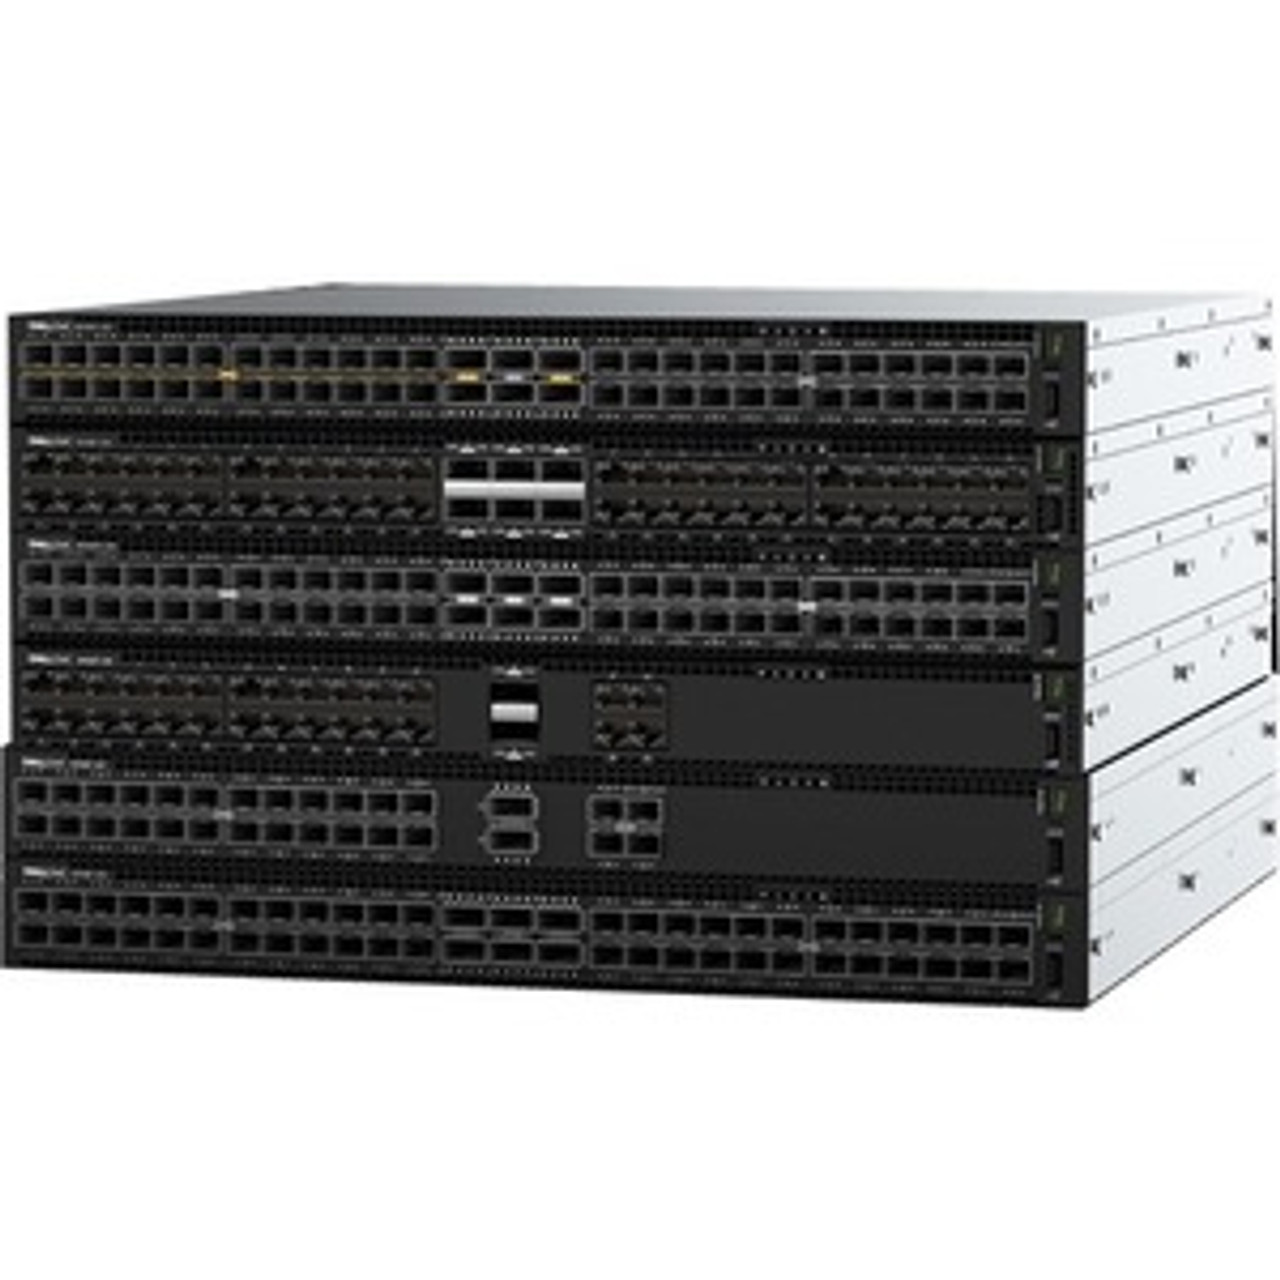 S4148U Dell EMC PowerSwitch S4148U Ethernet Switch - Manageable - 3 Layer Supported - Modular - 460 W Power Consumption - Optical Fiber - 1U High -